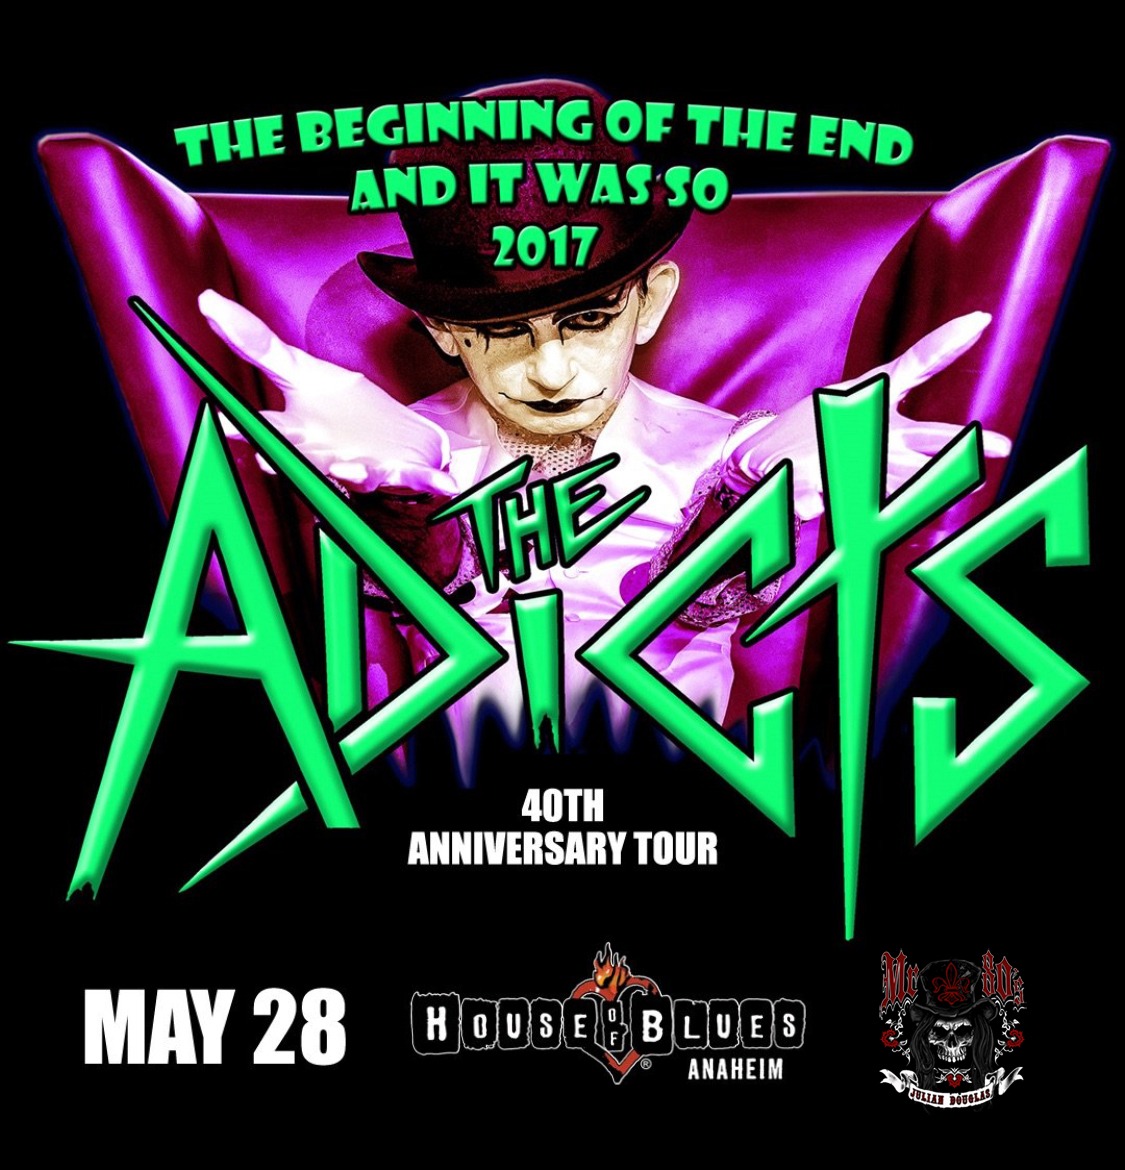 THE ADICTS “40th Anniversary Tour”